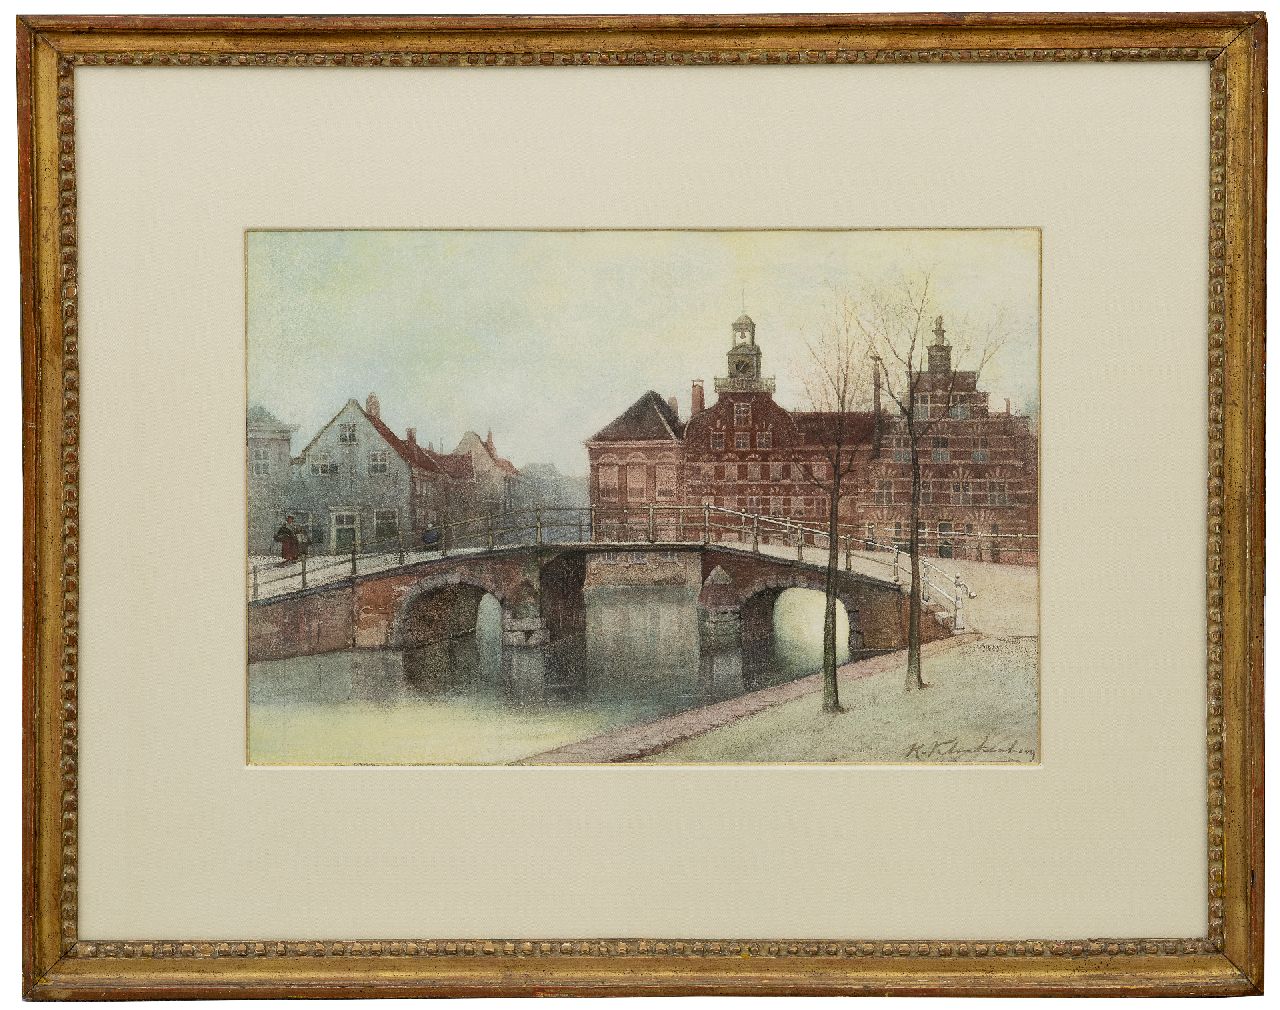 Klinkenberg J.C.K.  | Johannes Christiaan Karel Klinkenberg | Watercolours and drawings offered for sale | The Oude Vrouwen- en Kinderhuis on the Spui in The Hague (The old women- and childrens home), watercolour on paper 29.1 x 41.7 cm, signed l.r.